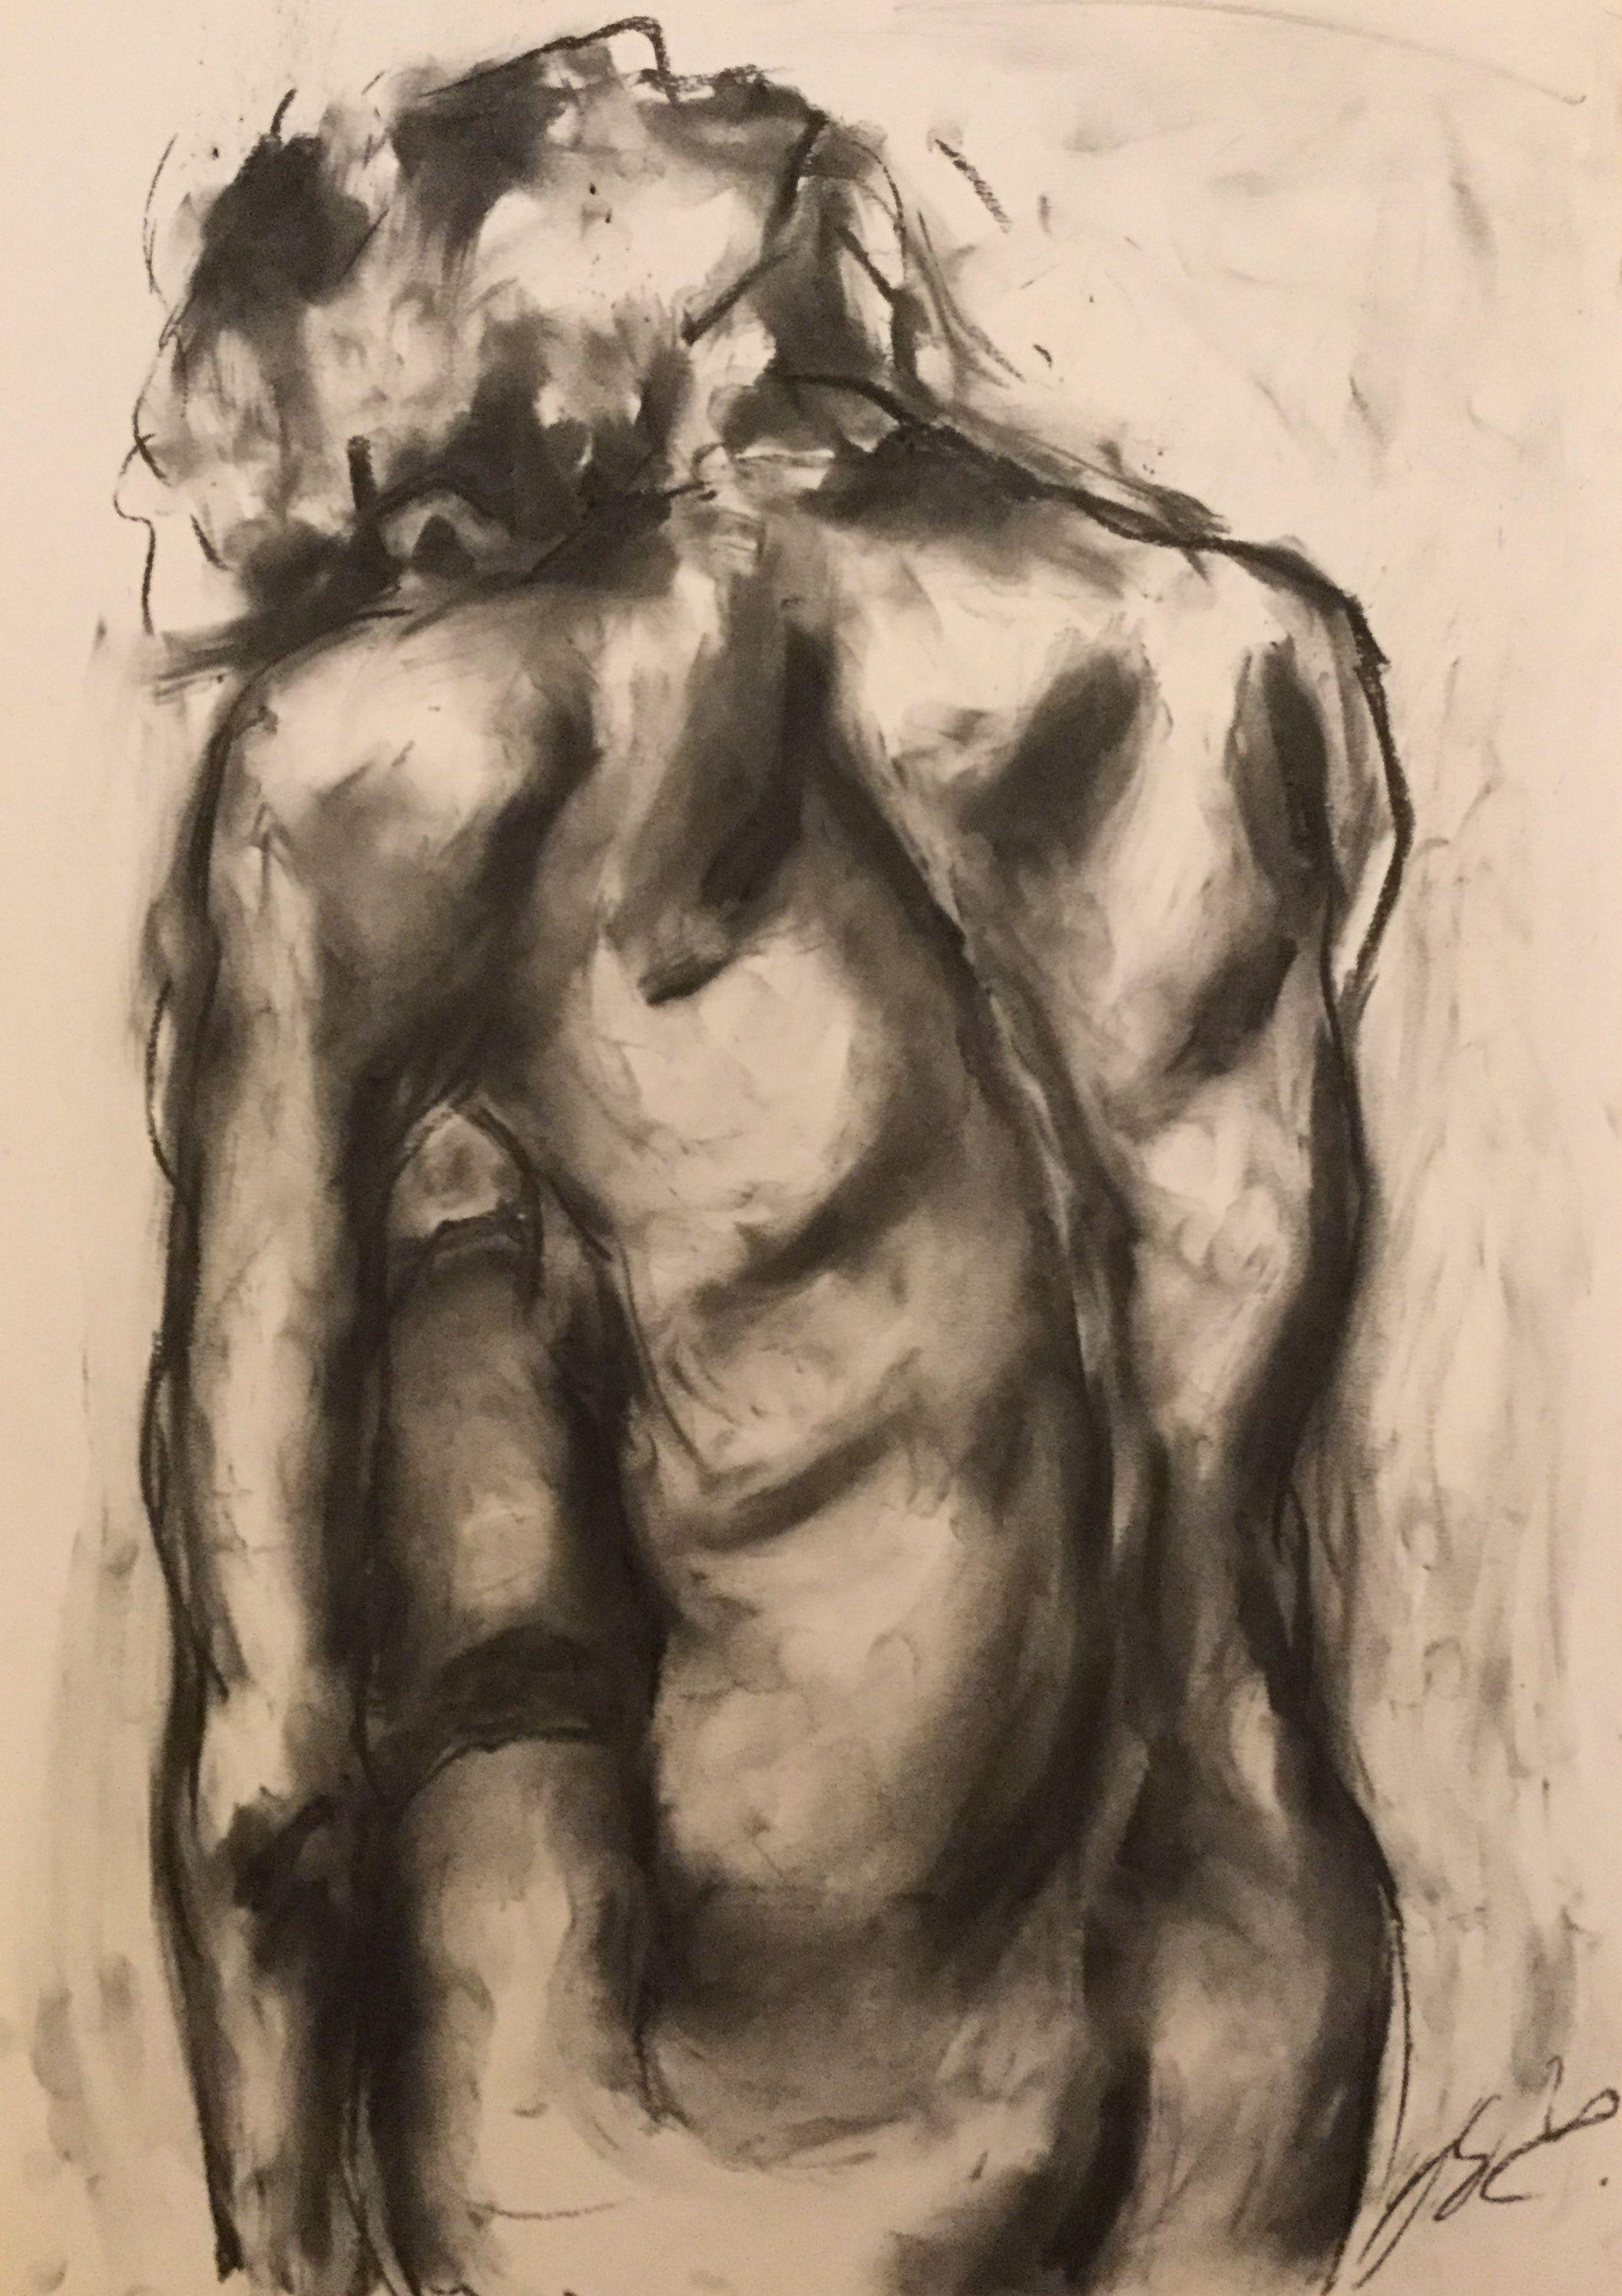 Finally, Drawing, Charcoal on Paper - Art by James Shipton